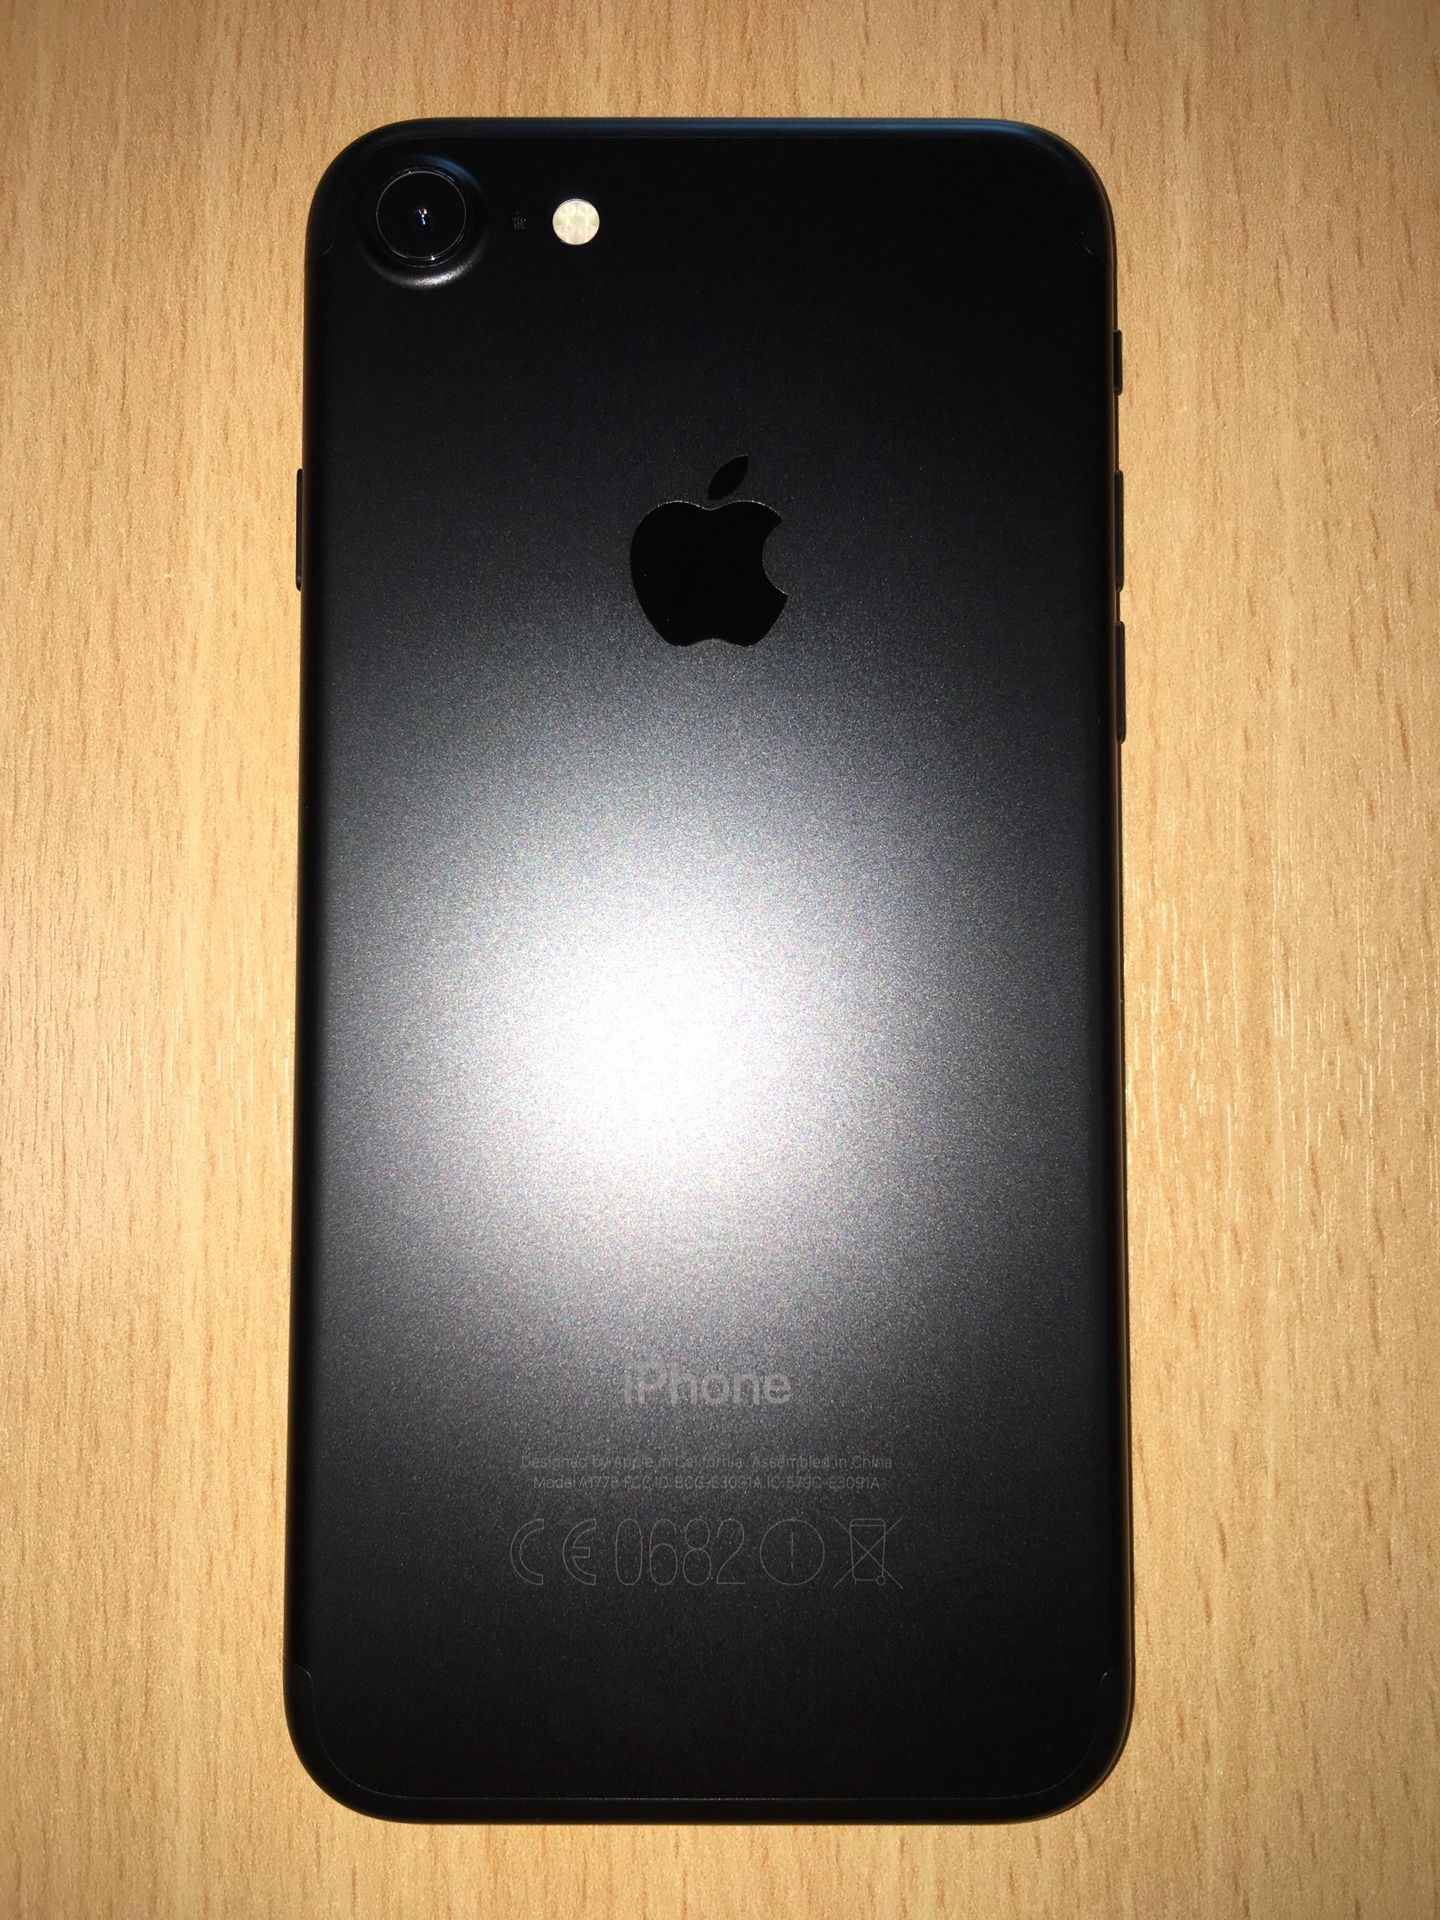 iPhone 7 Black - unlocked for any carrier